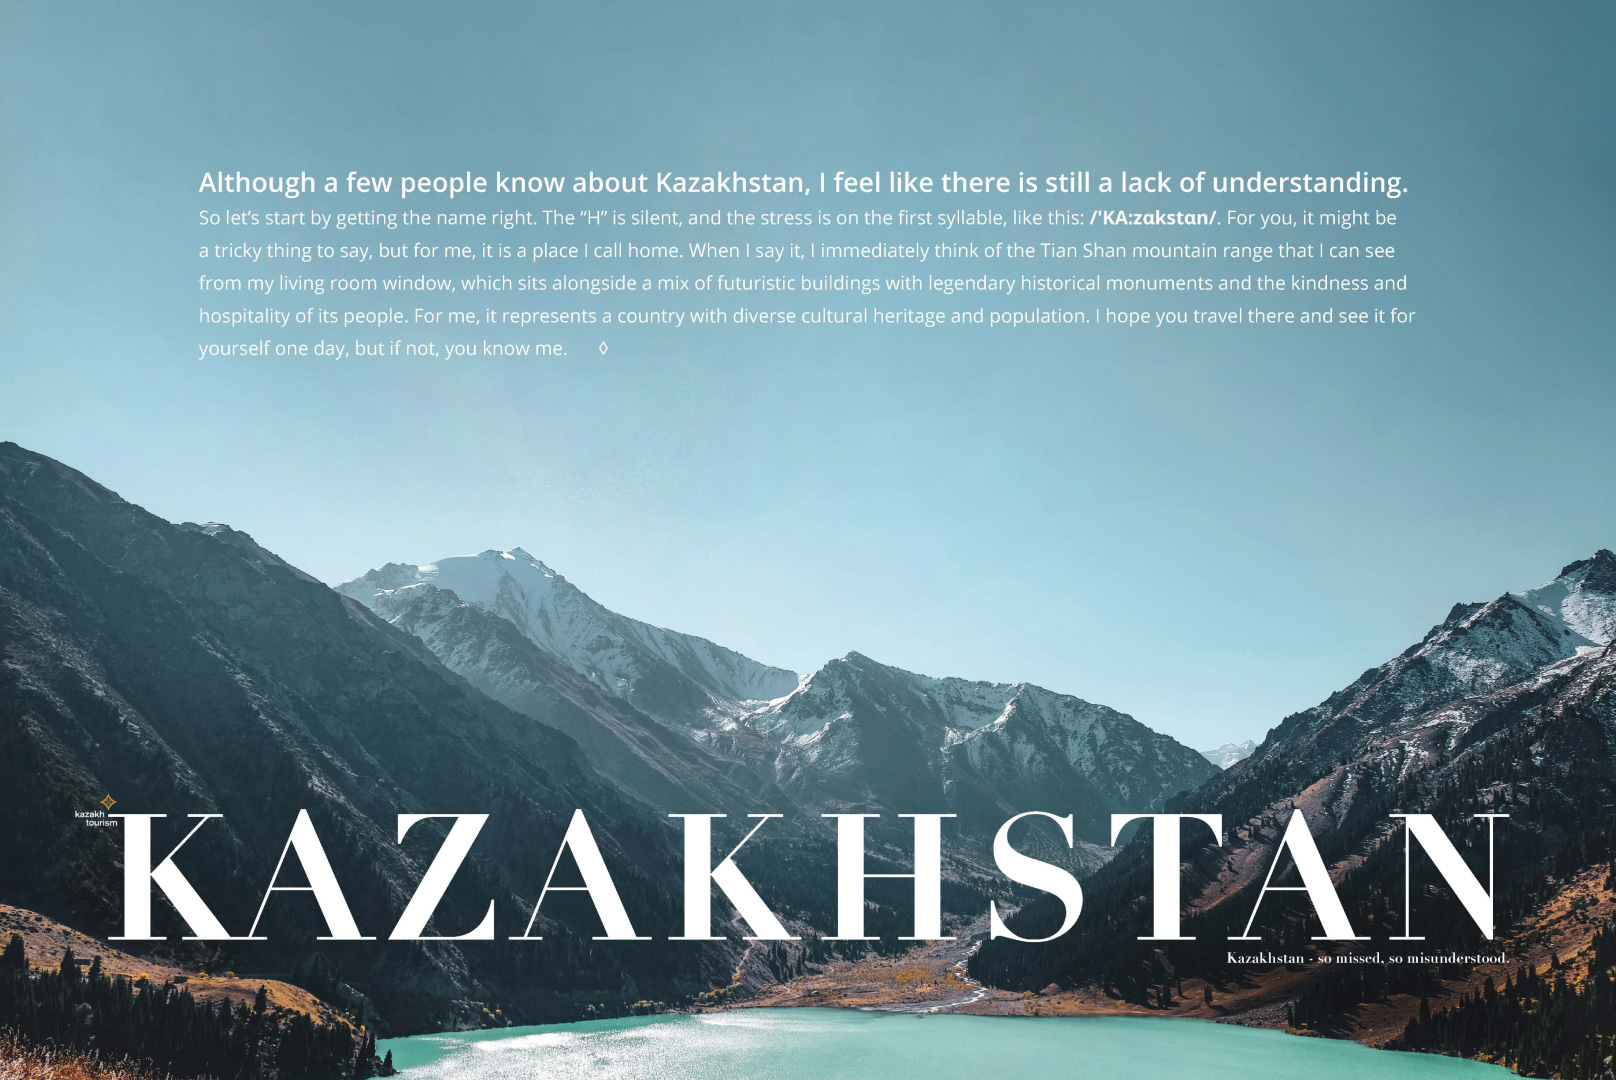 "I hope you travel there and see it for yourself one day, but if not, you know me." Kazakhstan - so missed, so misunderstood.